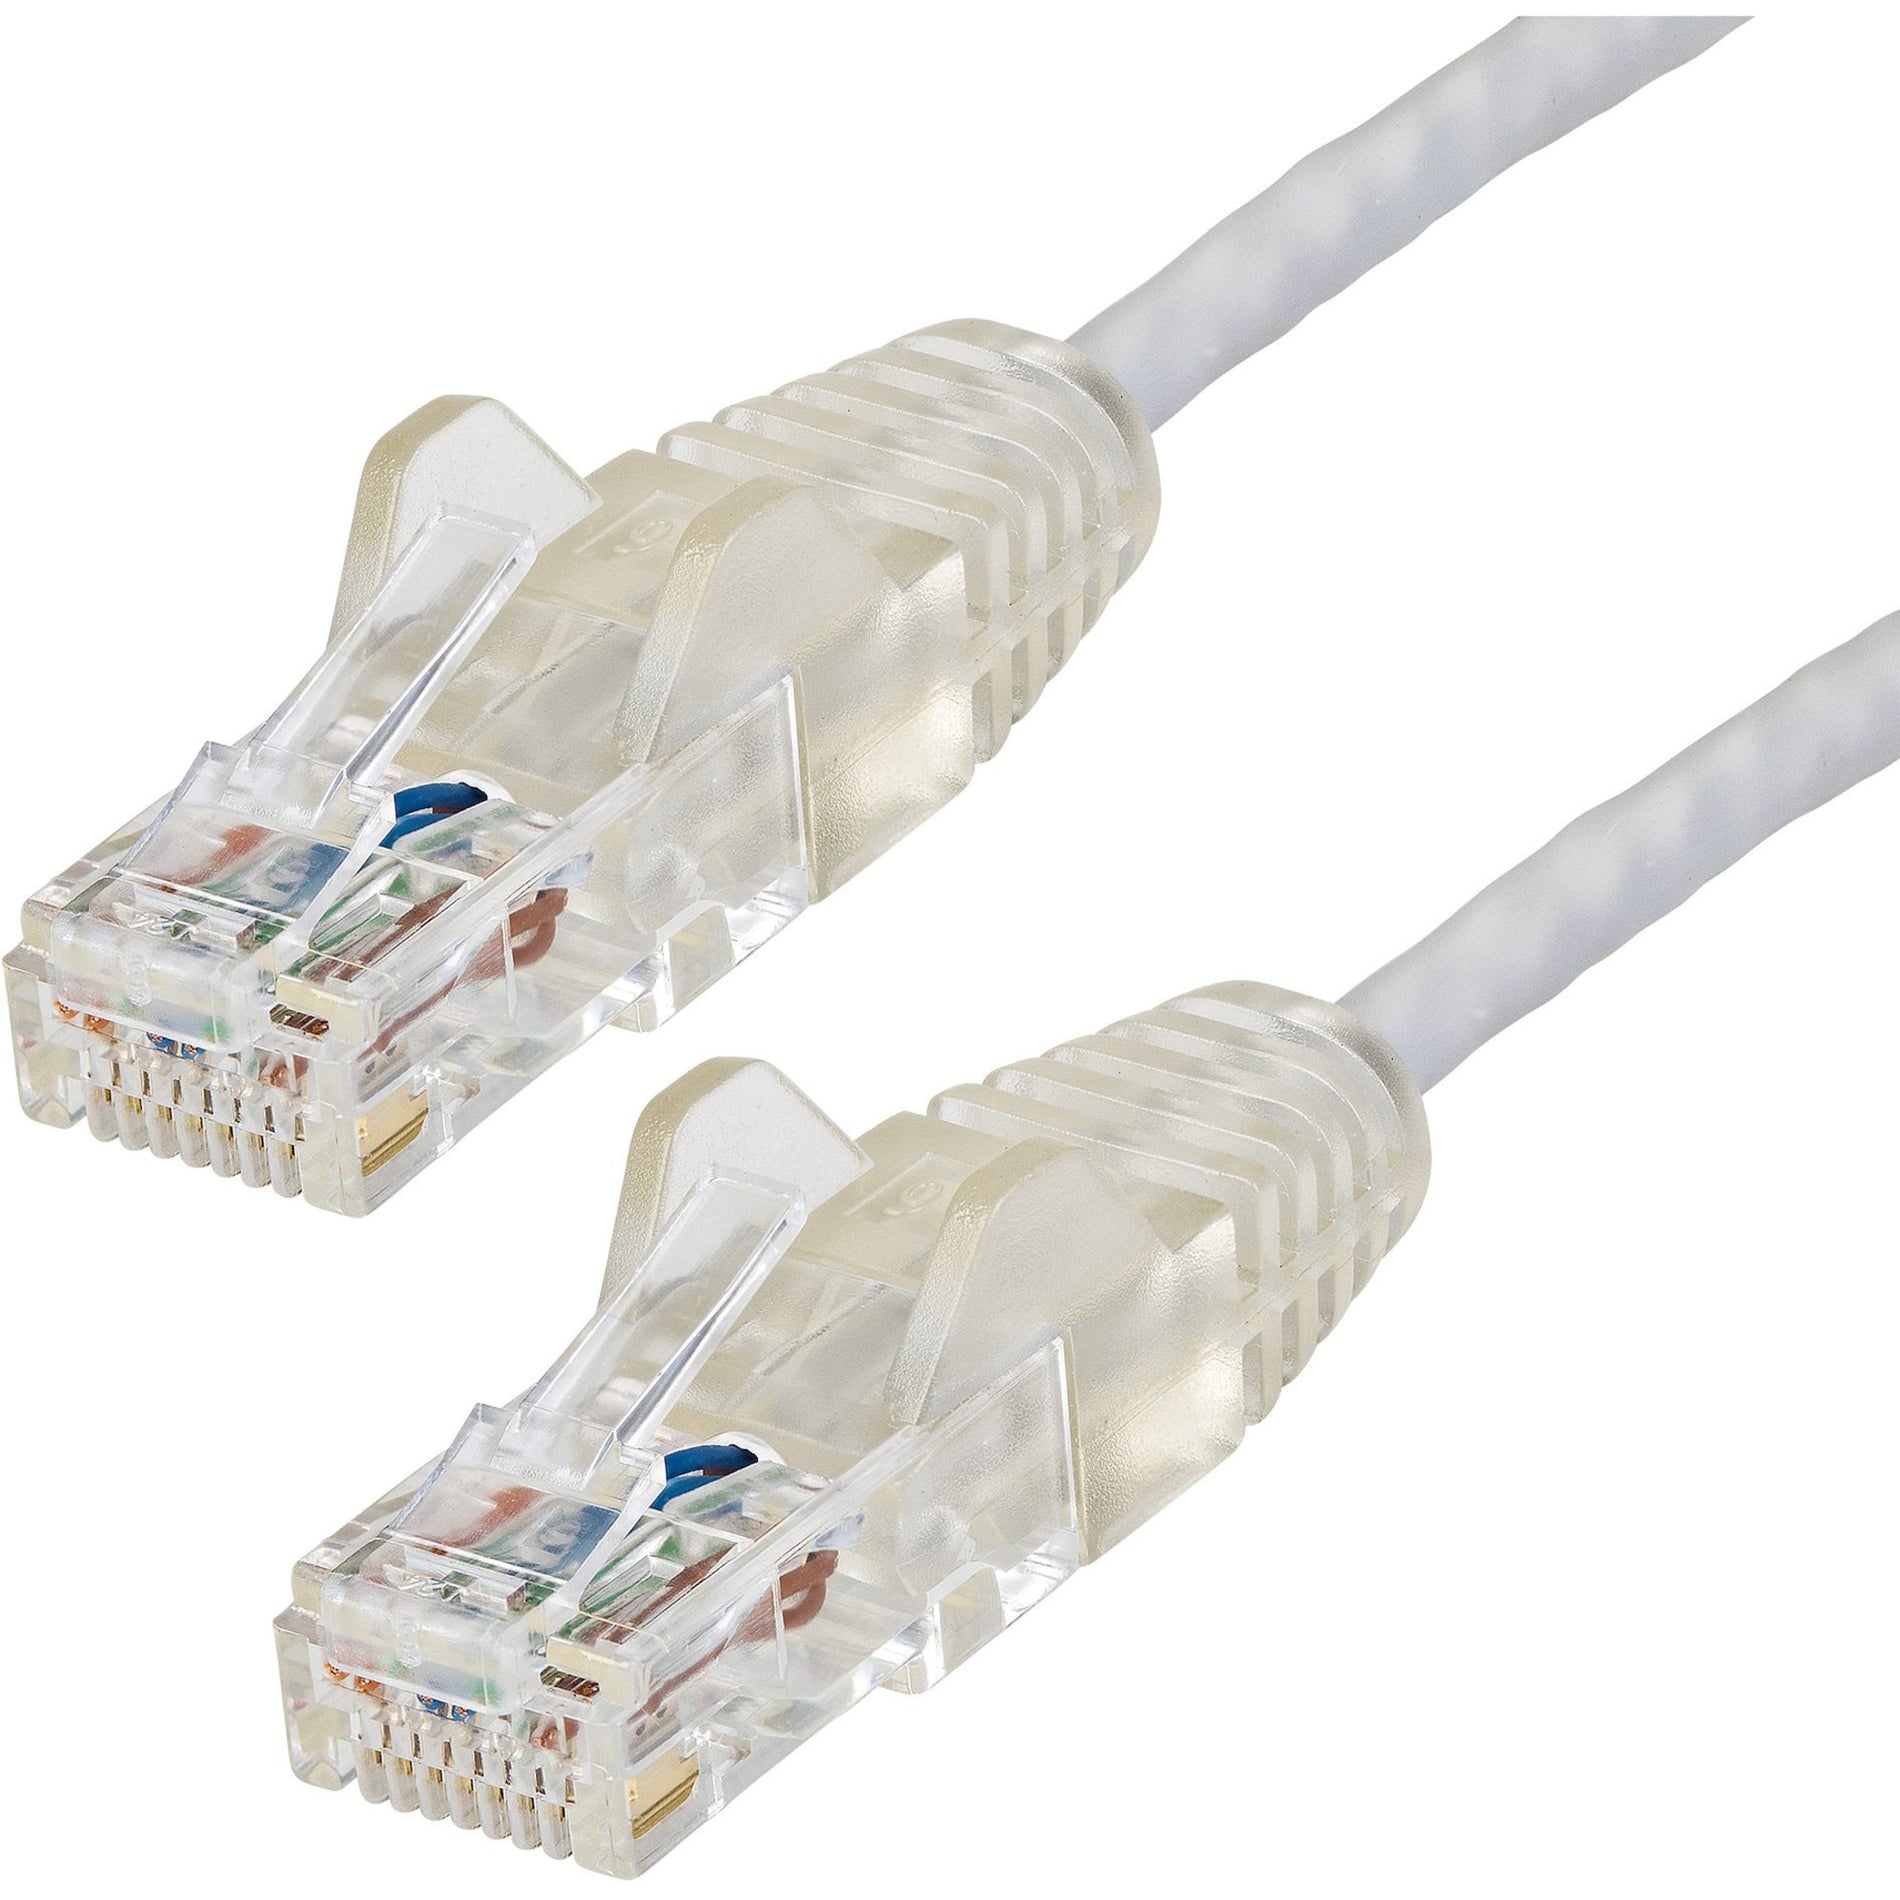 StarTech.com N6PAT1GRS Cat6 Patch Network Cable, 1 ft Gray, Slim, Snagless RJ45 Connectors, Cat6 Cable, Cat6 Patch Cable, Cat6 Network Cable